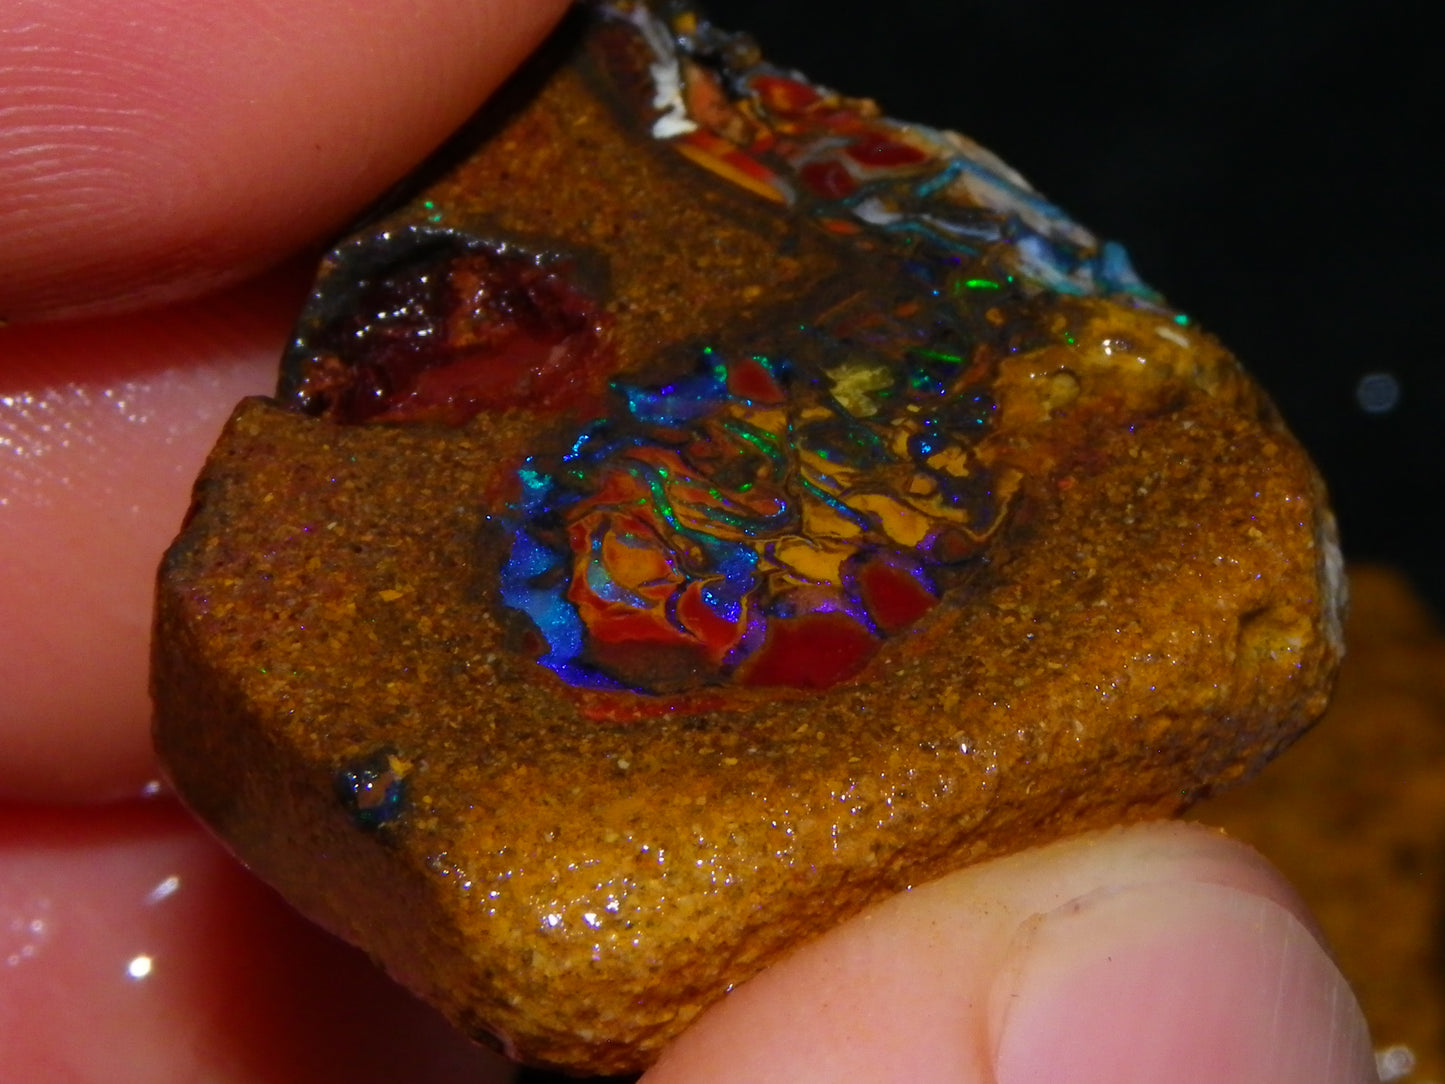 Nice Koroit Opal Rough/sliced Parcel 175.5cts Green/Blue Fires Patterns :) Qld Au